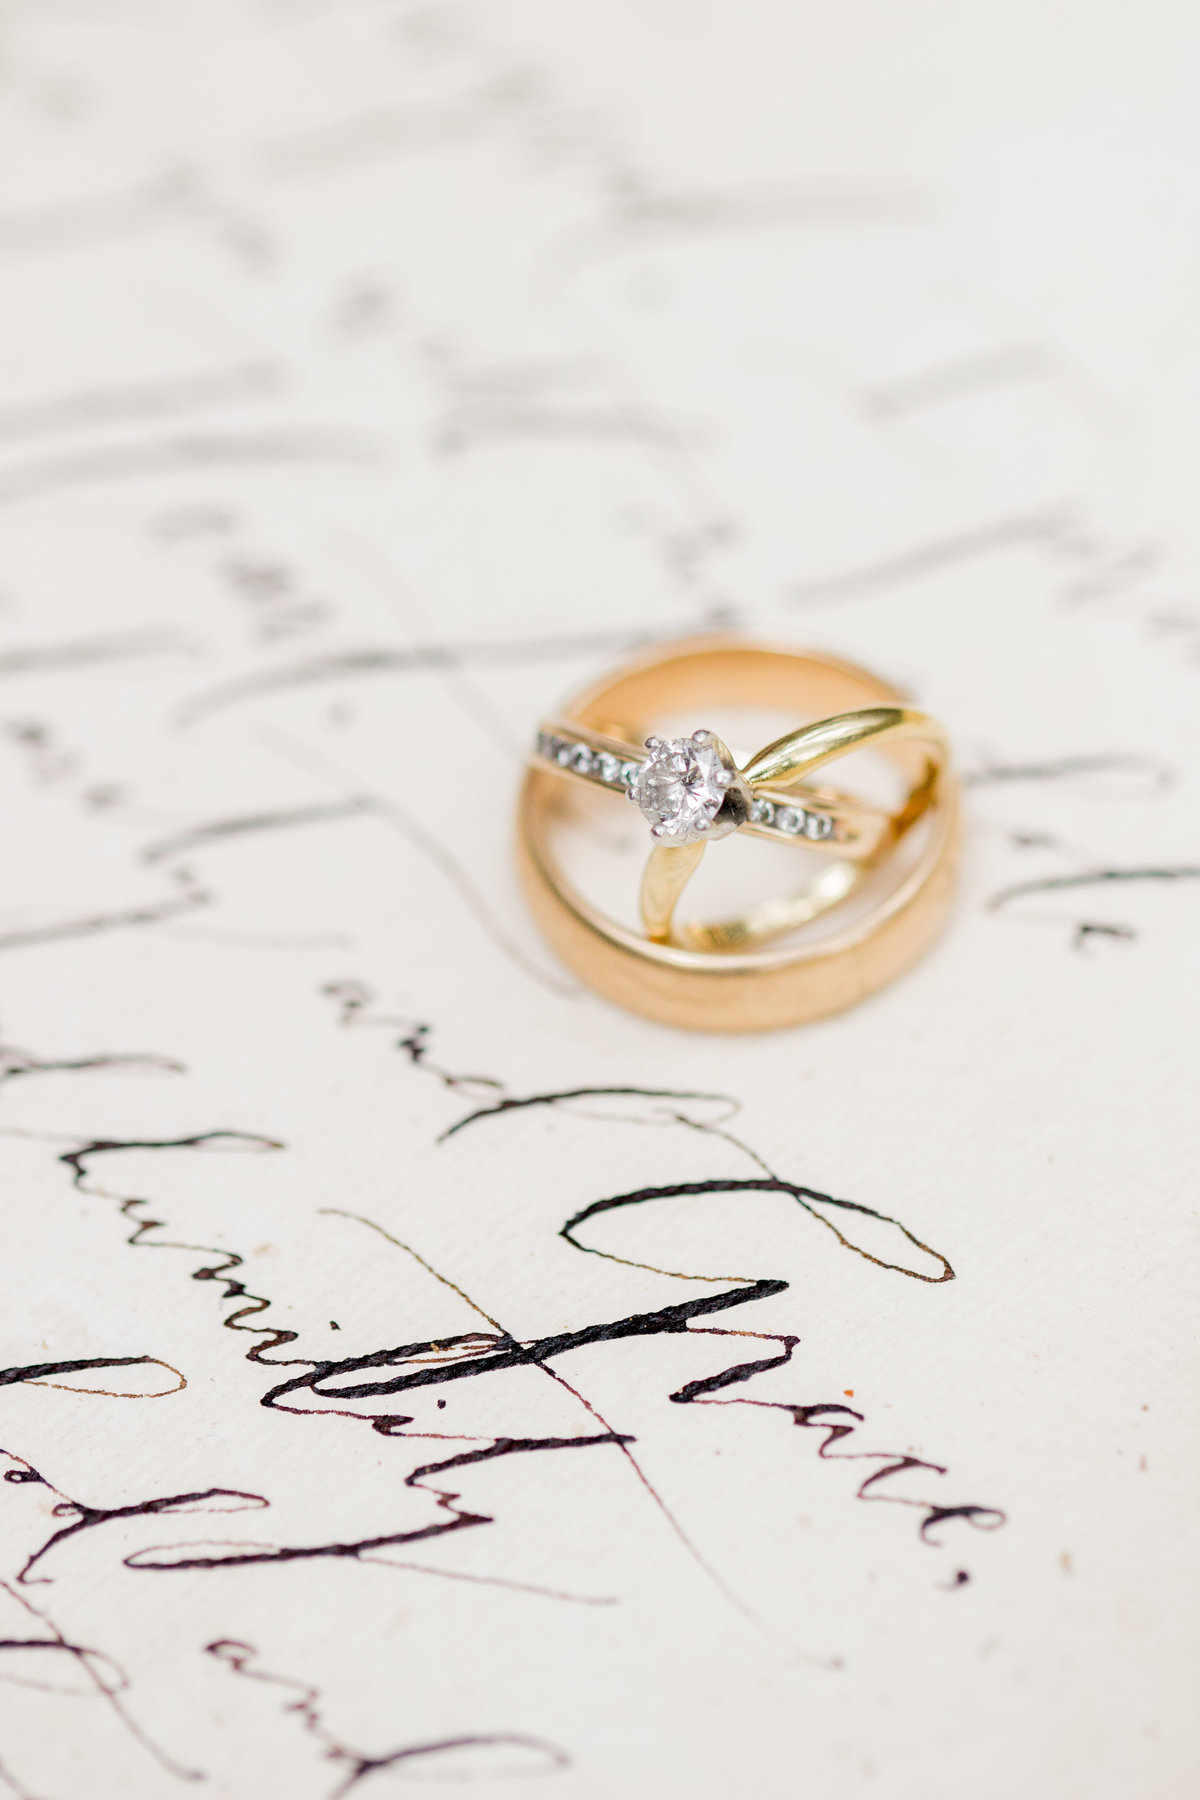 Idaho Falls Photographers capture wedding details from outdoor elopement with wedding invitation calligraphy and wedding rings